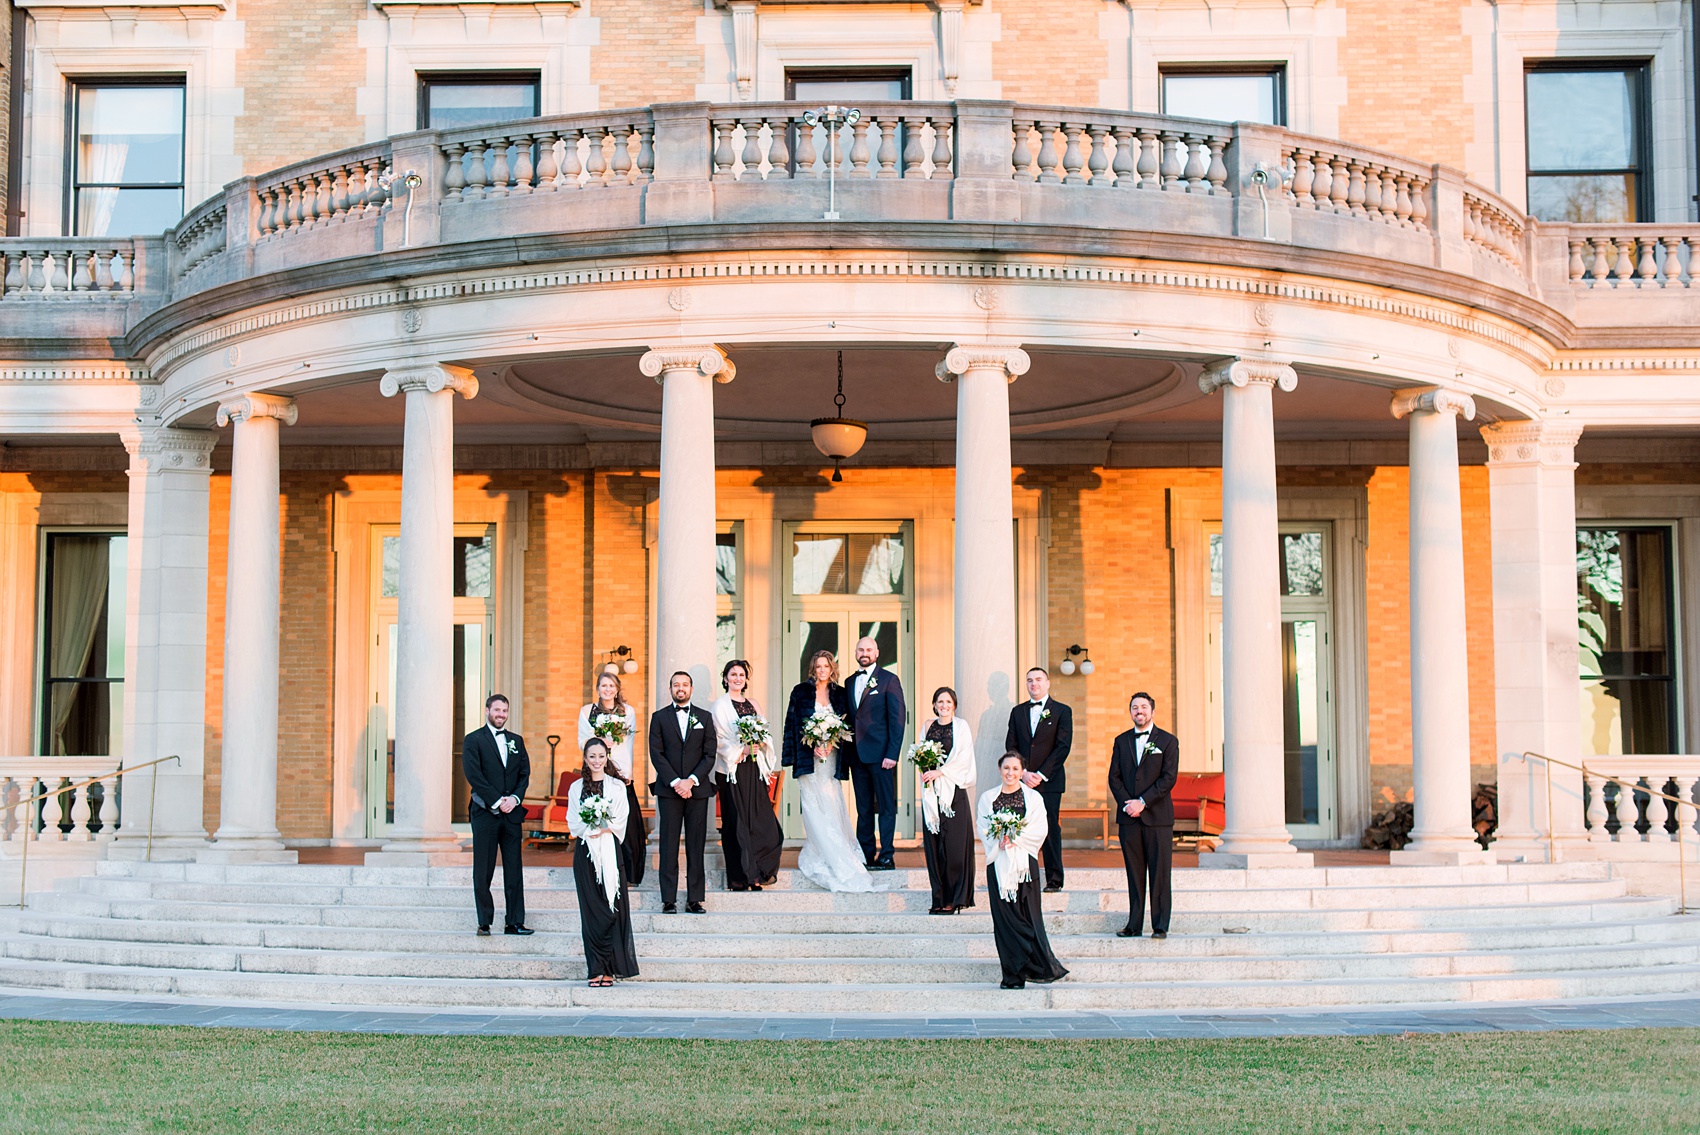 Wedding photos at Sleepy Hollow Country Club for a winter reception in January by Mikkel Paige Photography. The bridal party is pictured with white shawls, black lace gowns, and black tuxedos on the iconic stairs with columns of this New York venue.